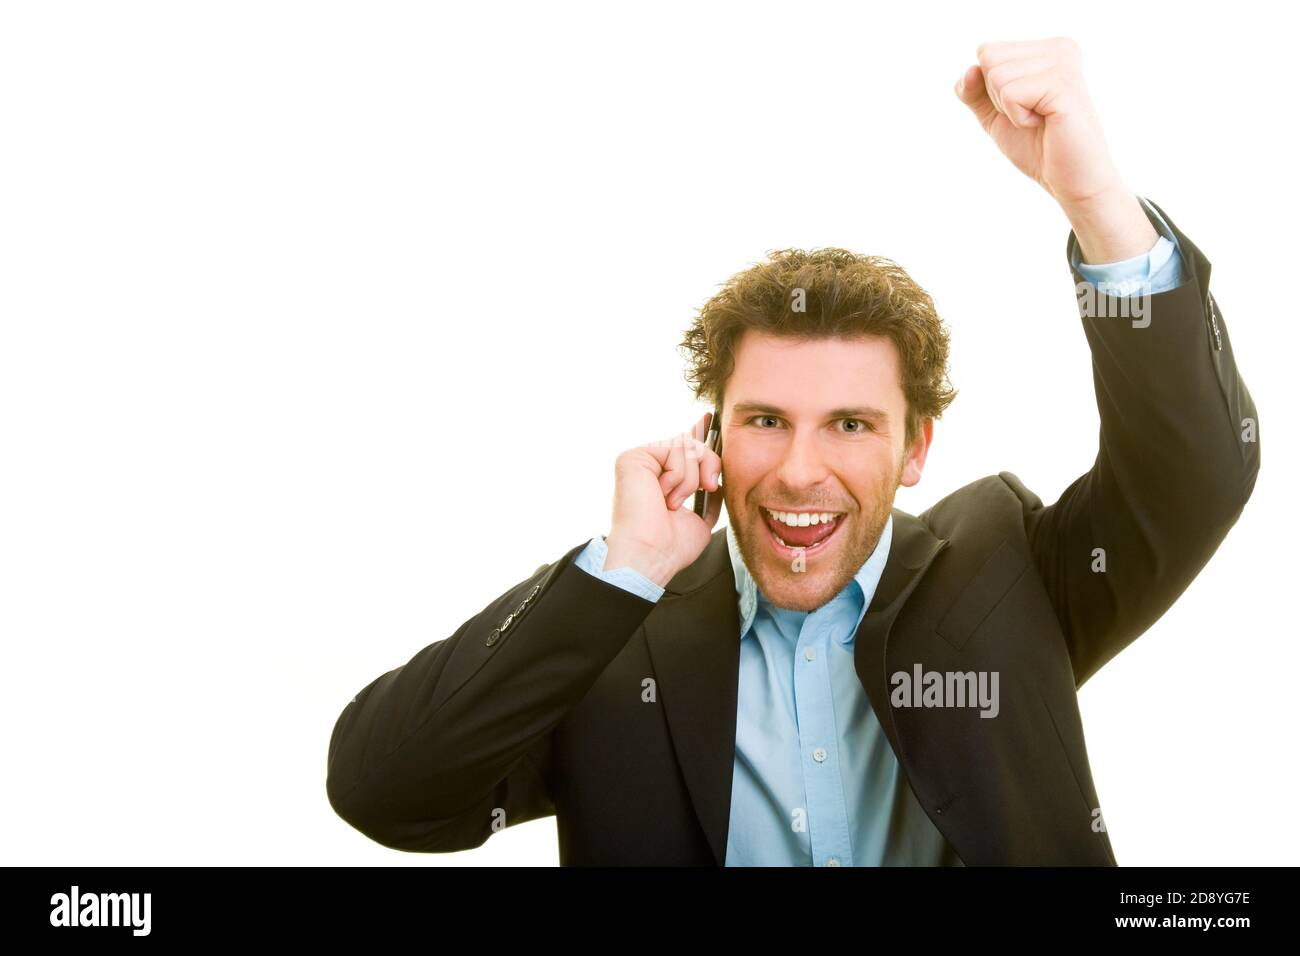 Young man in business attire is cheering on his cell phone Stock Photo